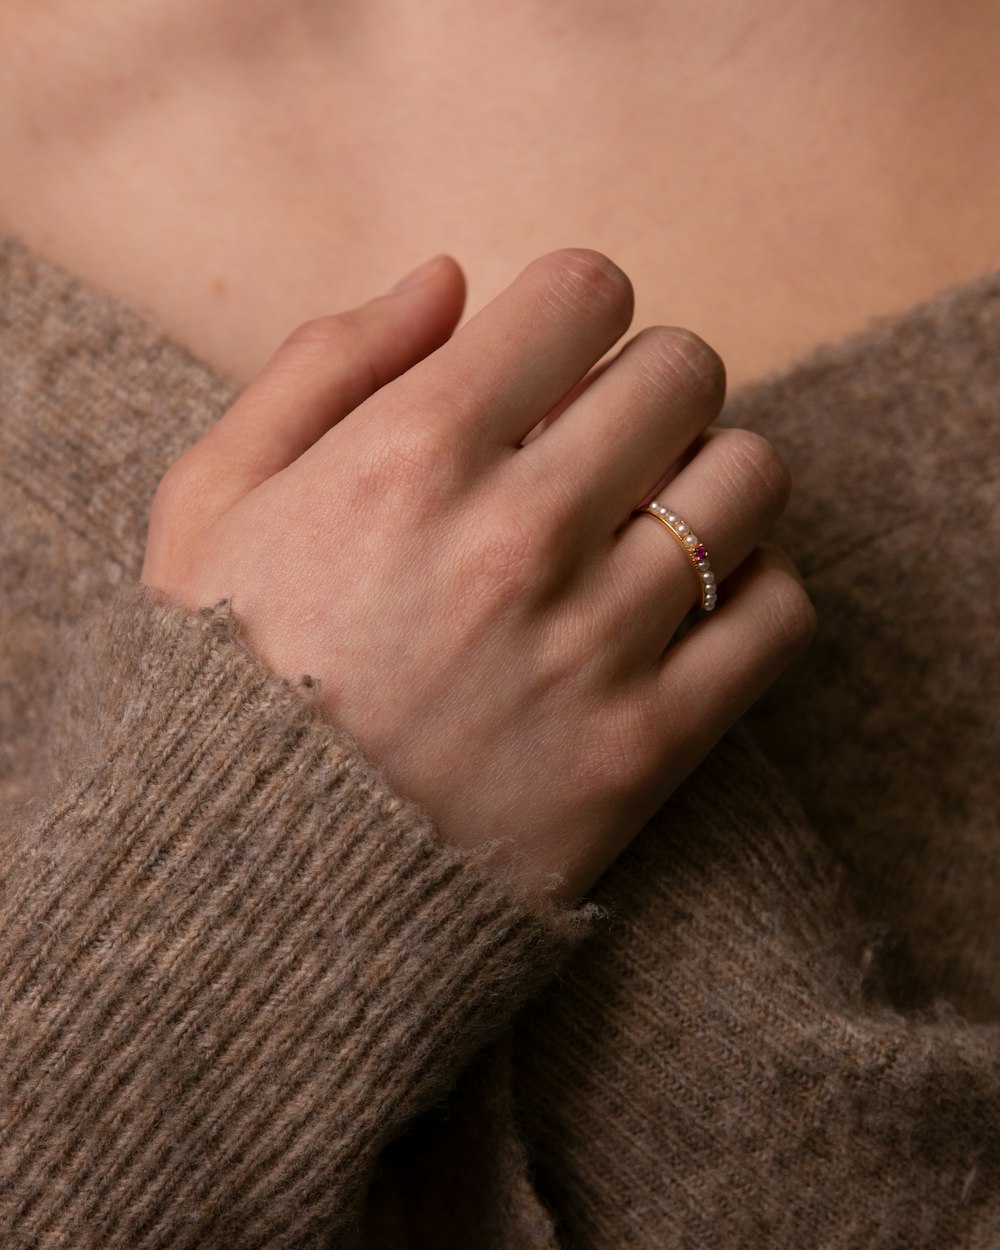 person wearing gold ring on left ring finger